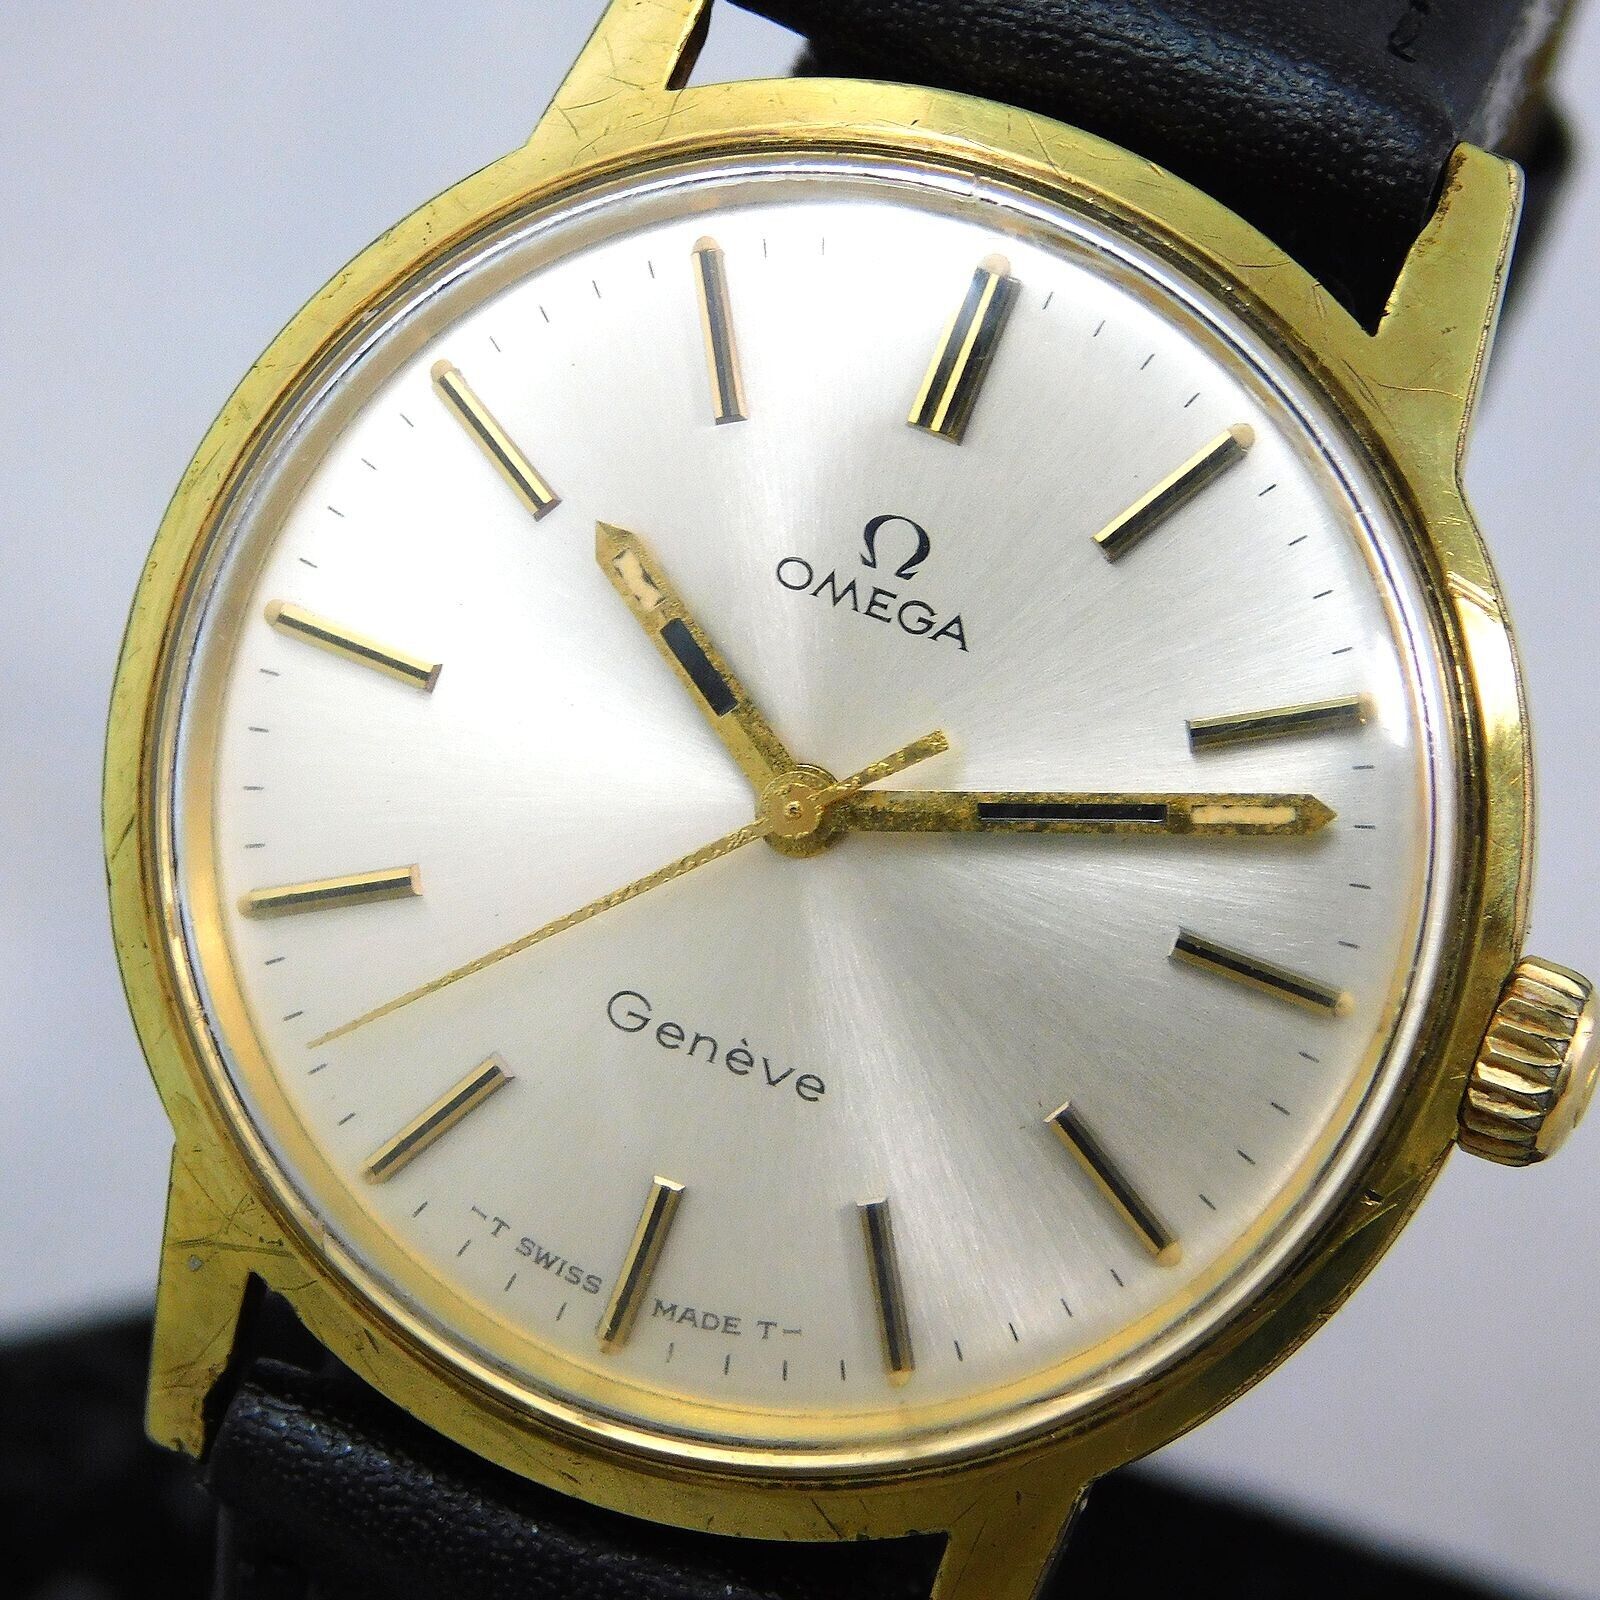 OMEGA GENEVE HAND WINDING MEN\'S GOLD PLATED VINTAGE WATCH SWISS MADE E876